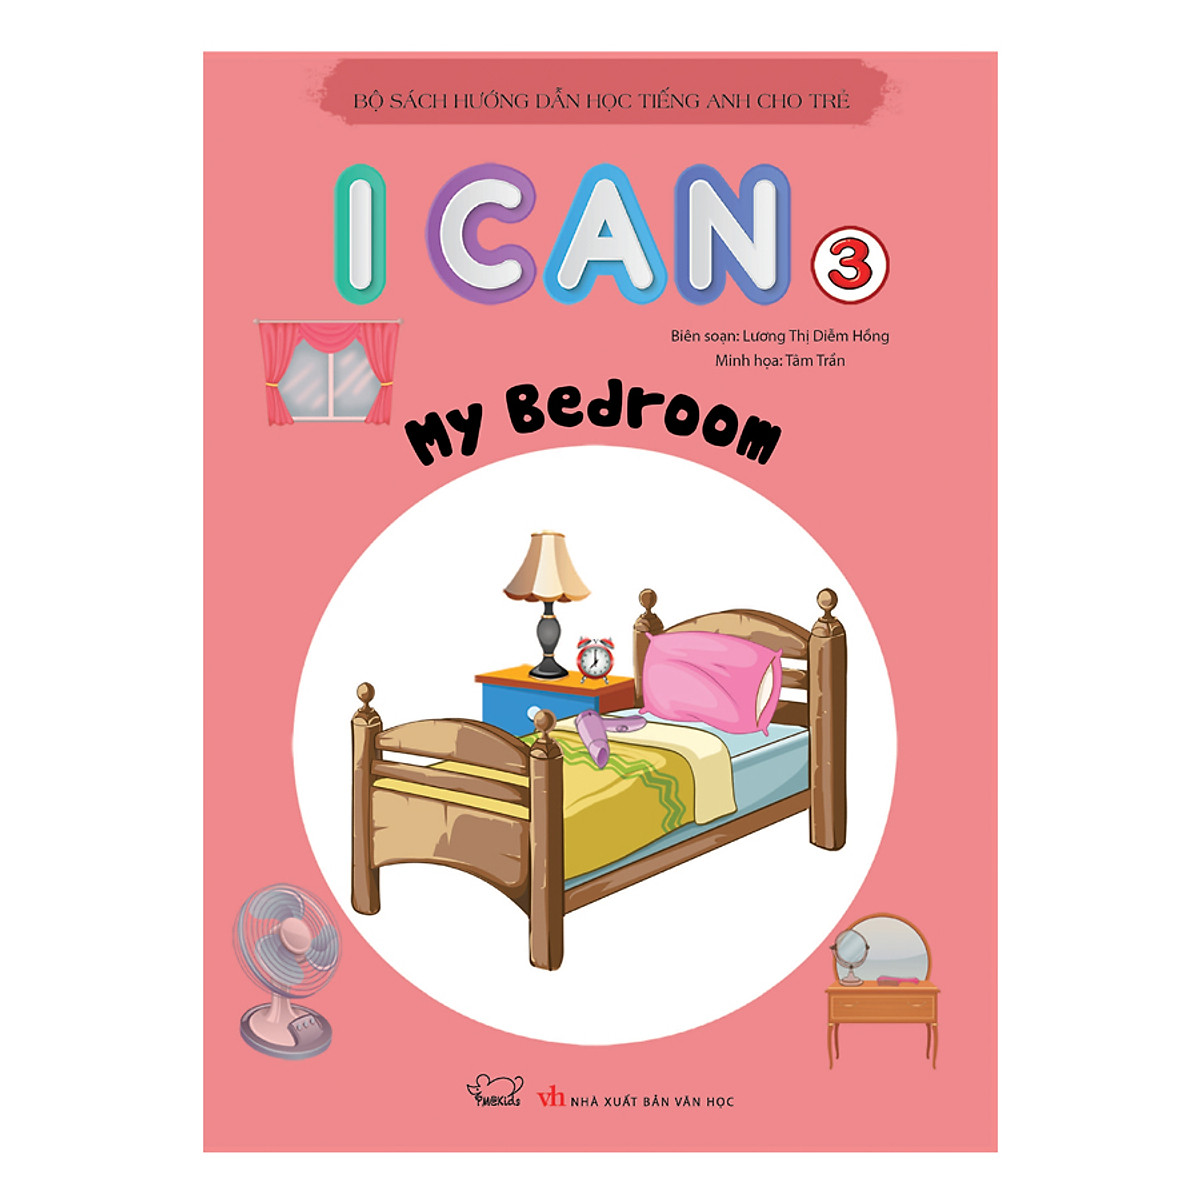 I Can: My Bedroom